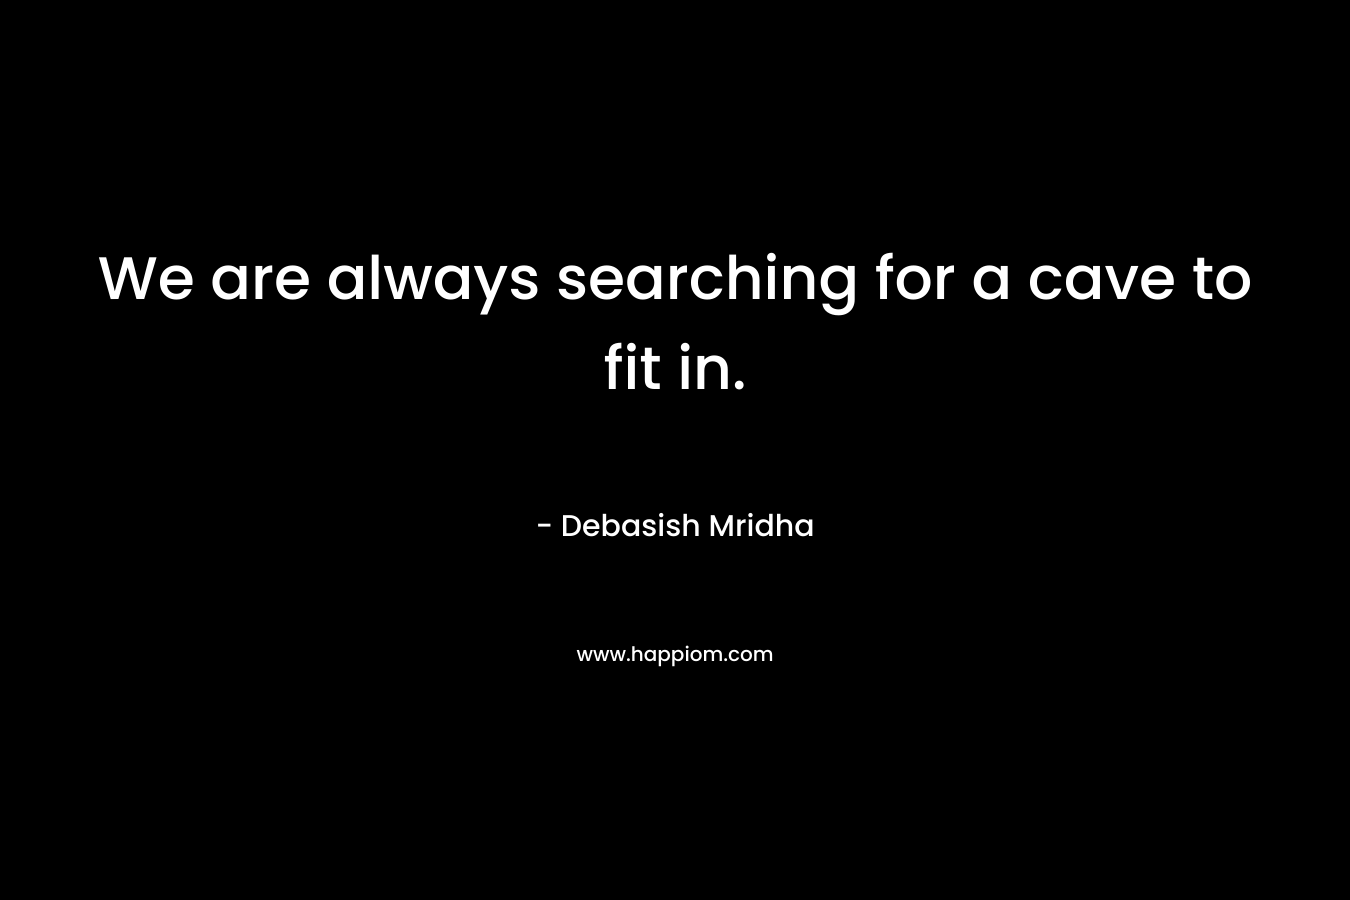 We are always searching for a cave to fit in. – Debasish Mridha